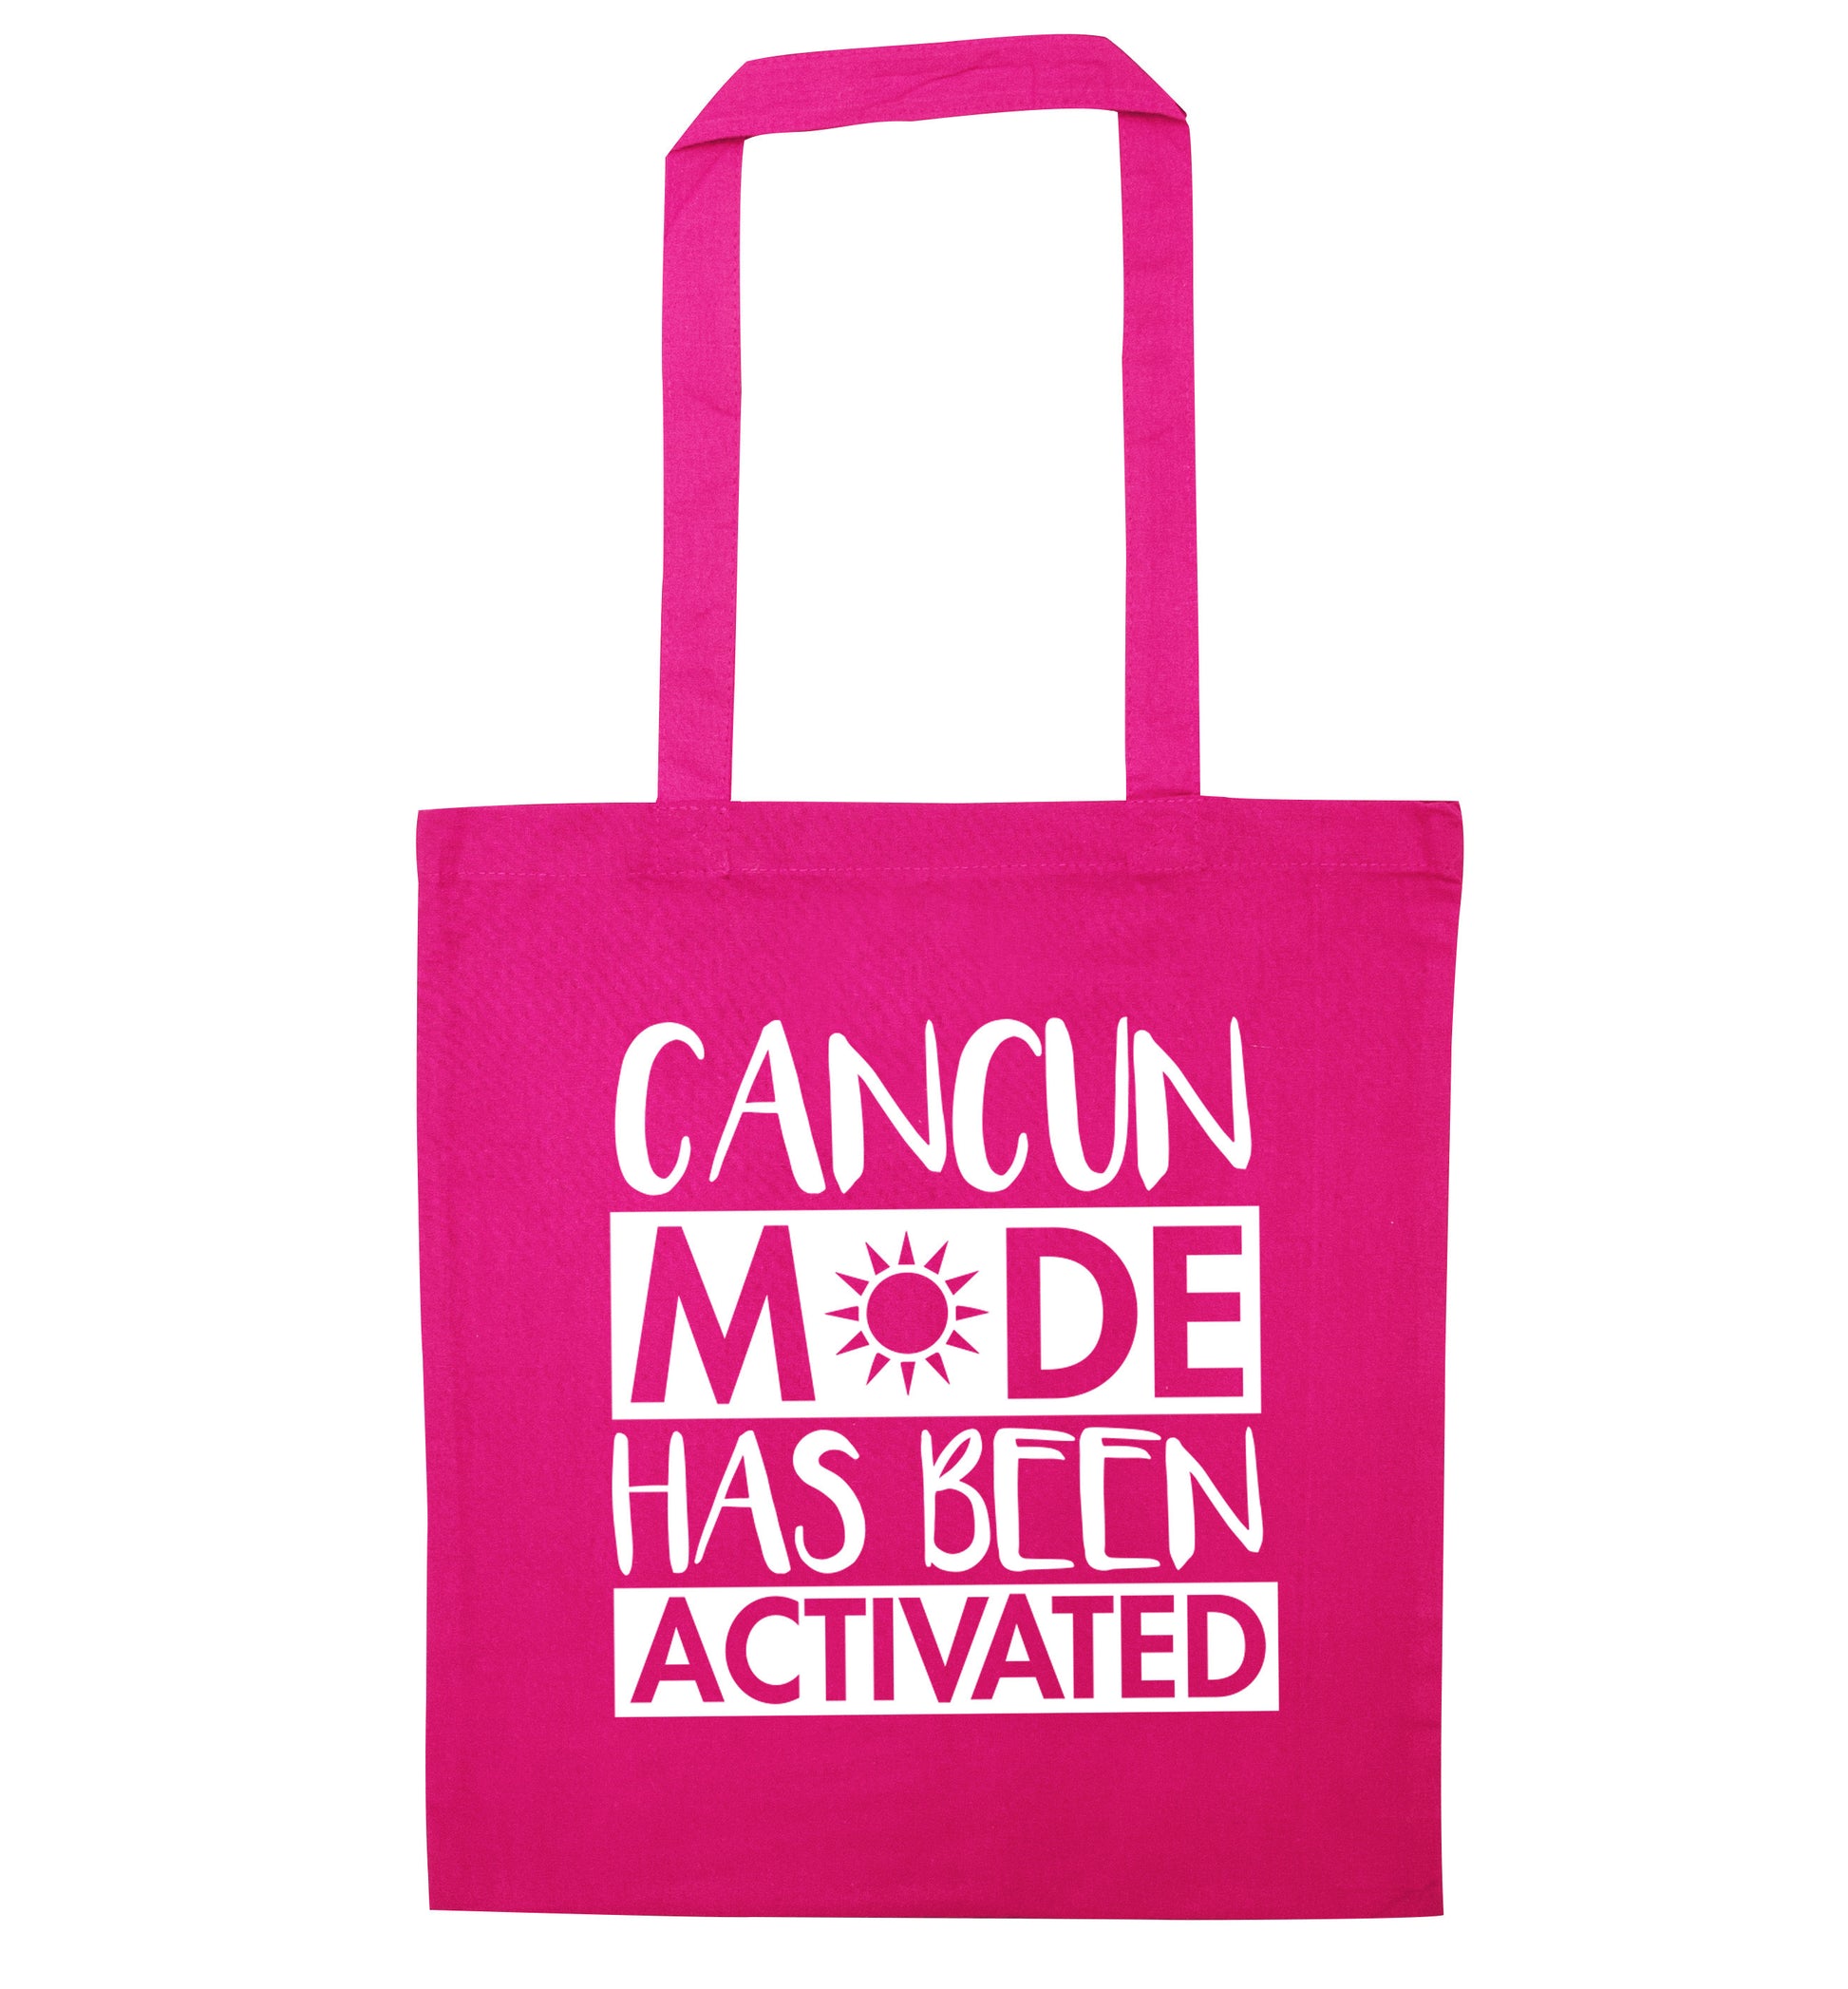 Cancun mode has been activated pink tote bag